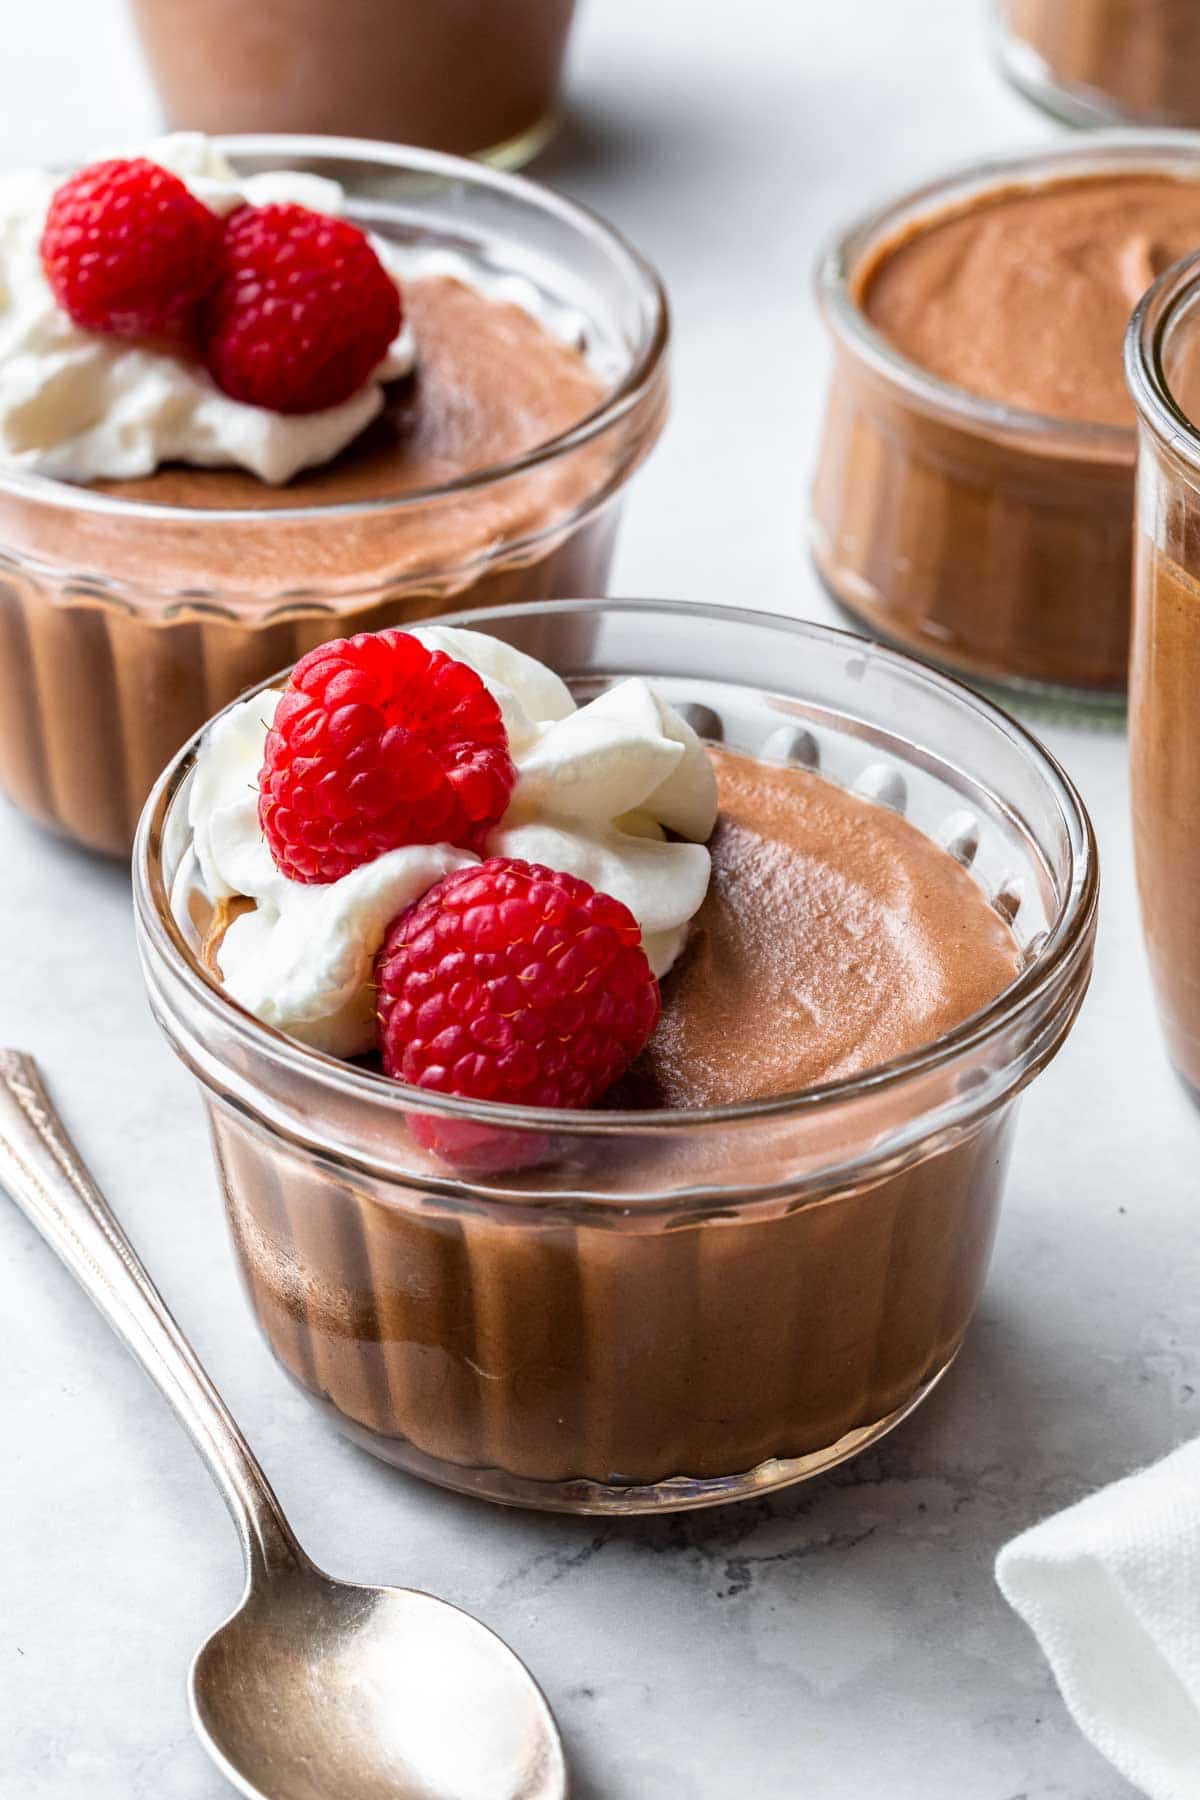 2 small glass bowls of chocolate mousse with a dollop of whipped cream and raspberries.